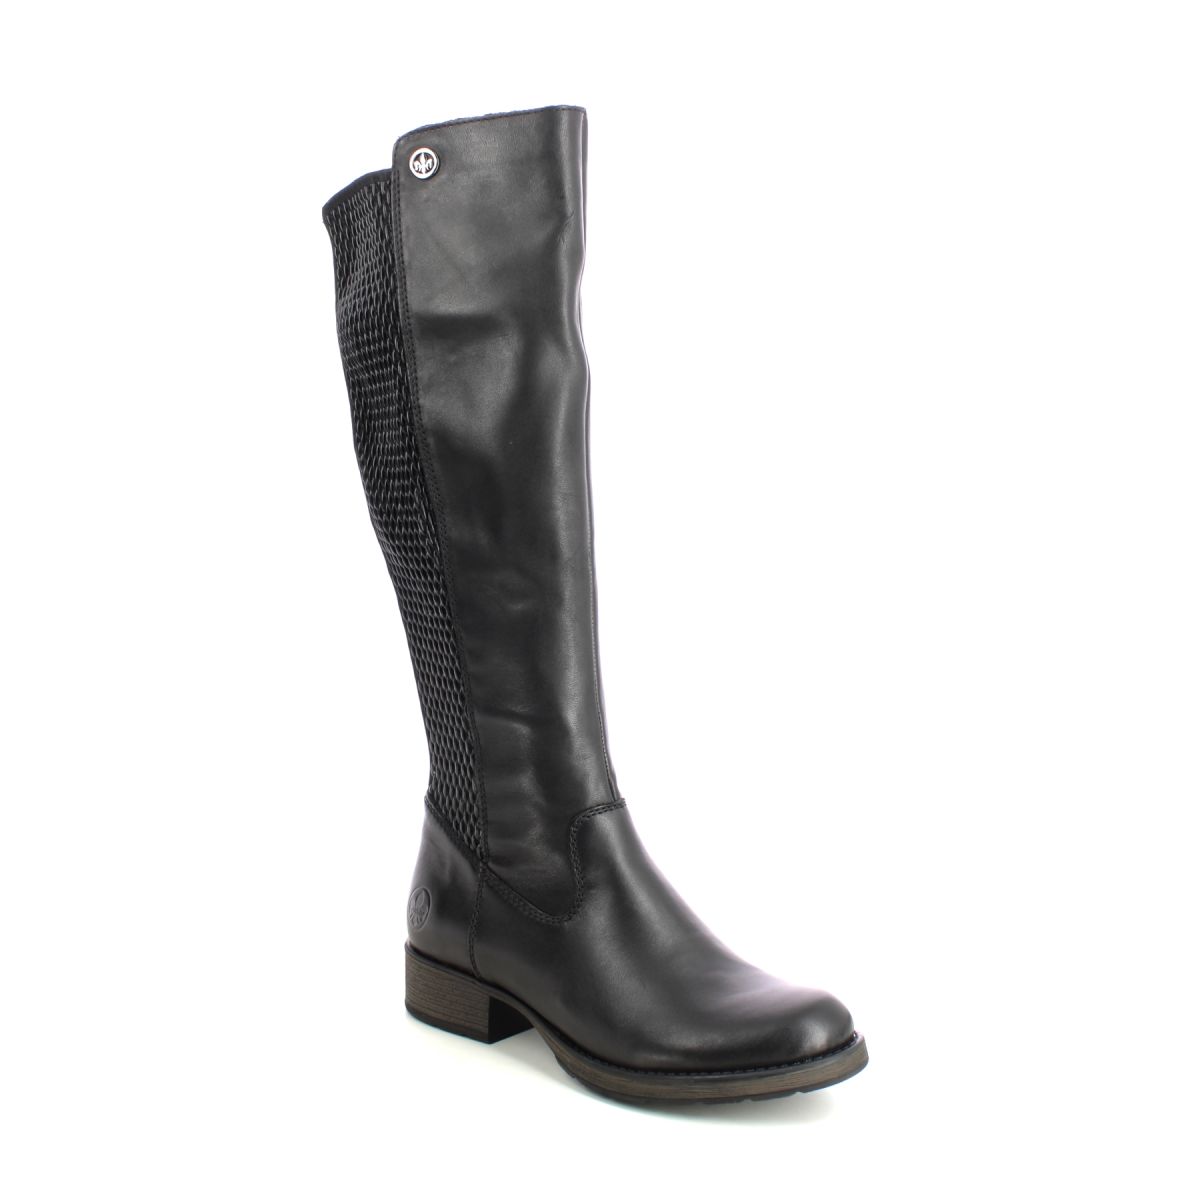 Rieker Indafit Stretch Black Leather Womens Knee-High Boots Z9591-00 In Size 39 In Plain Black Leather